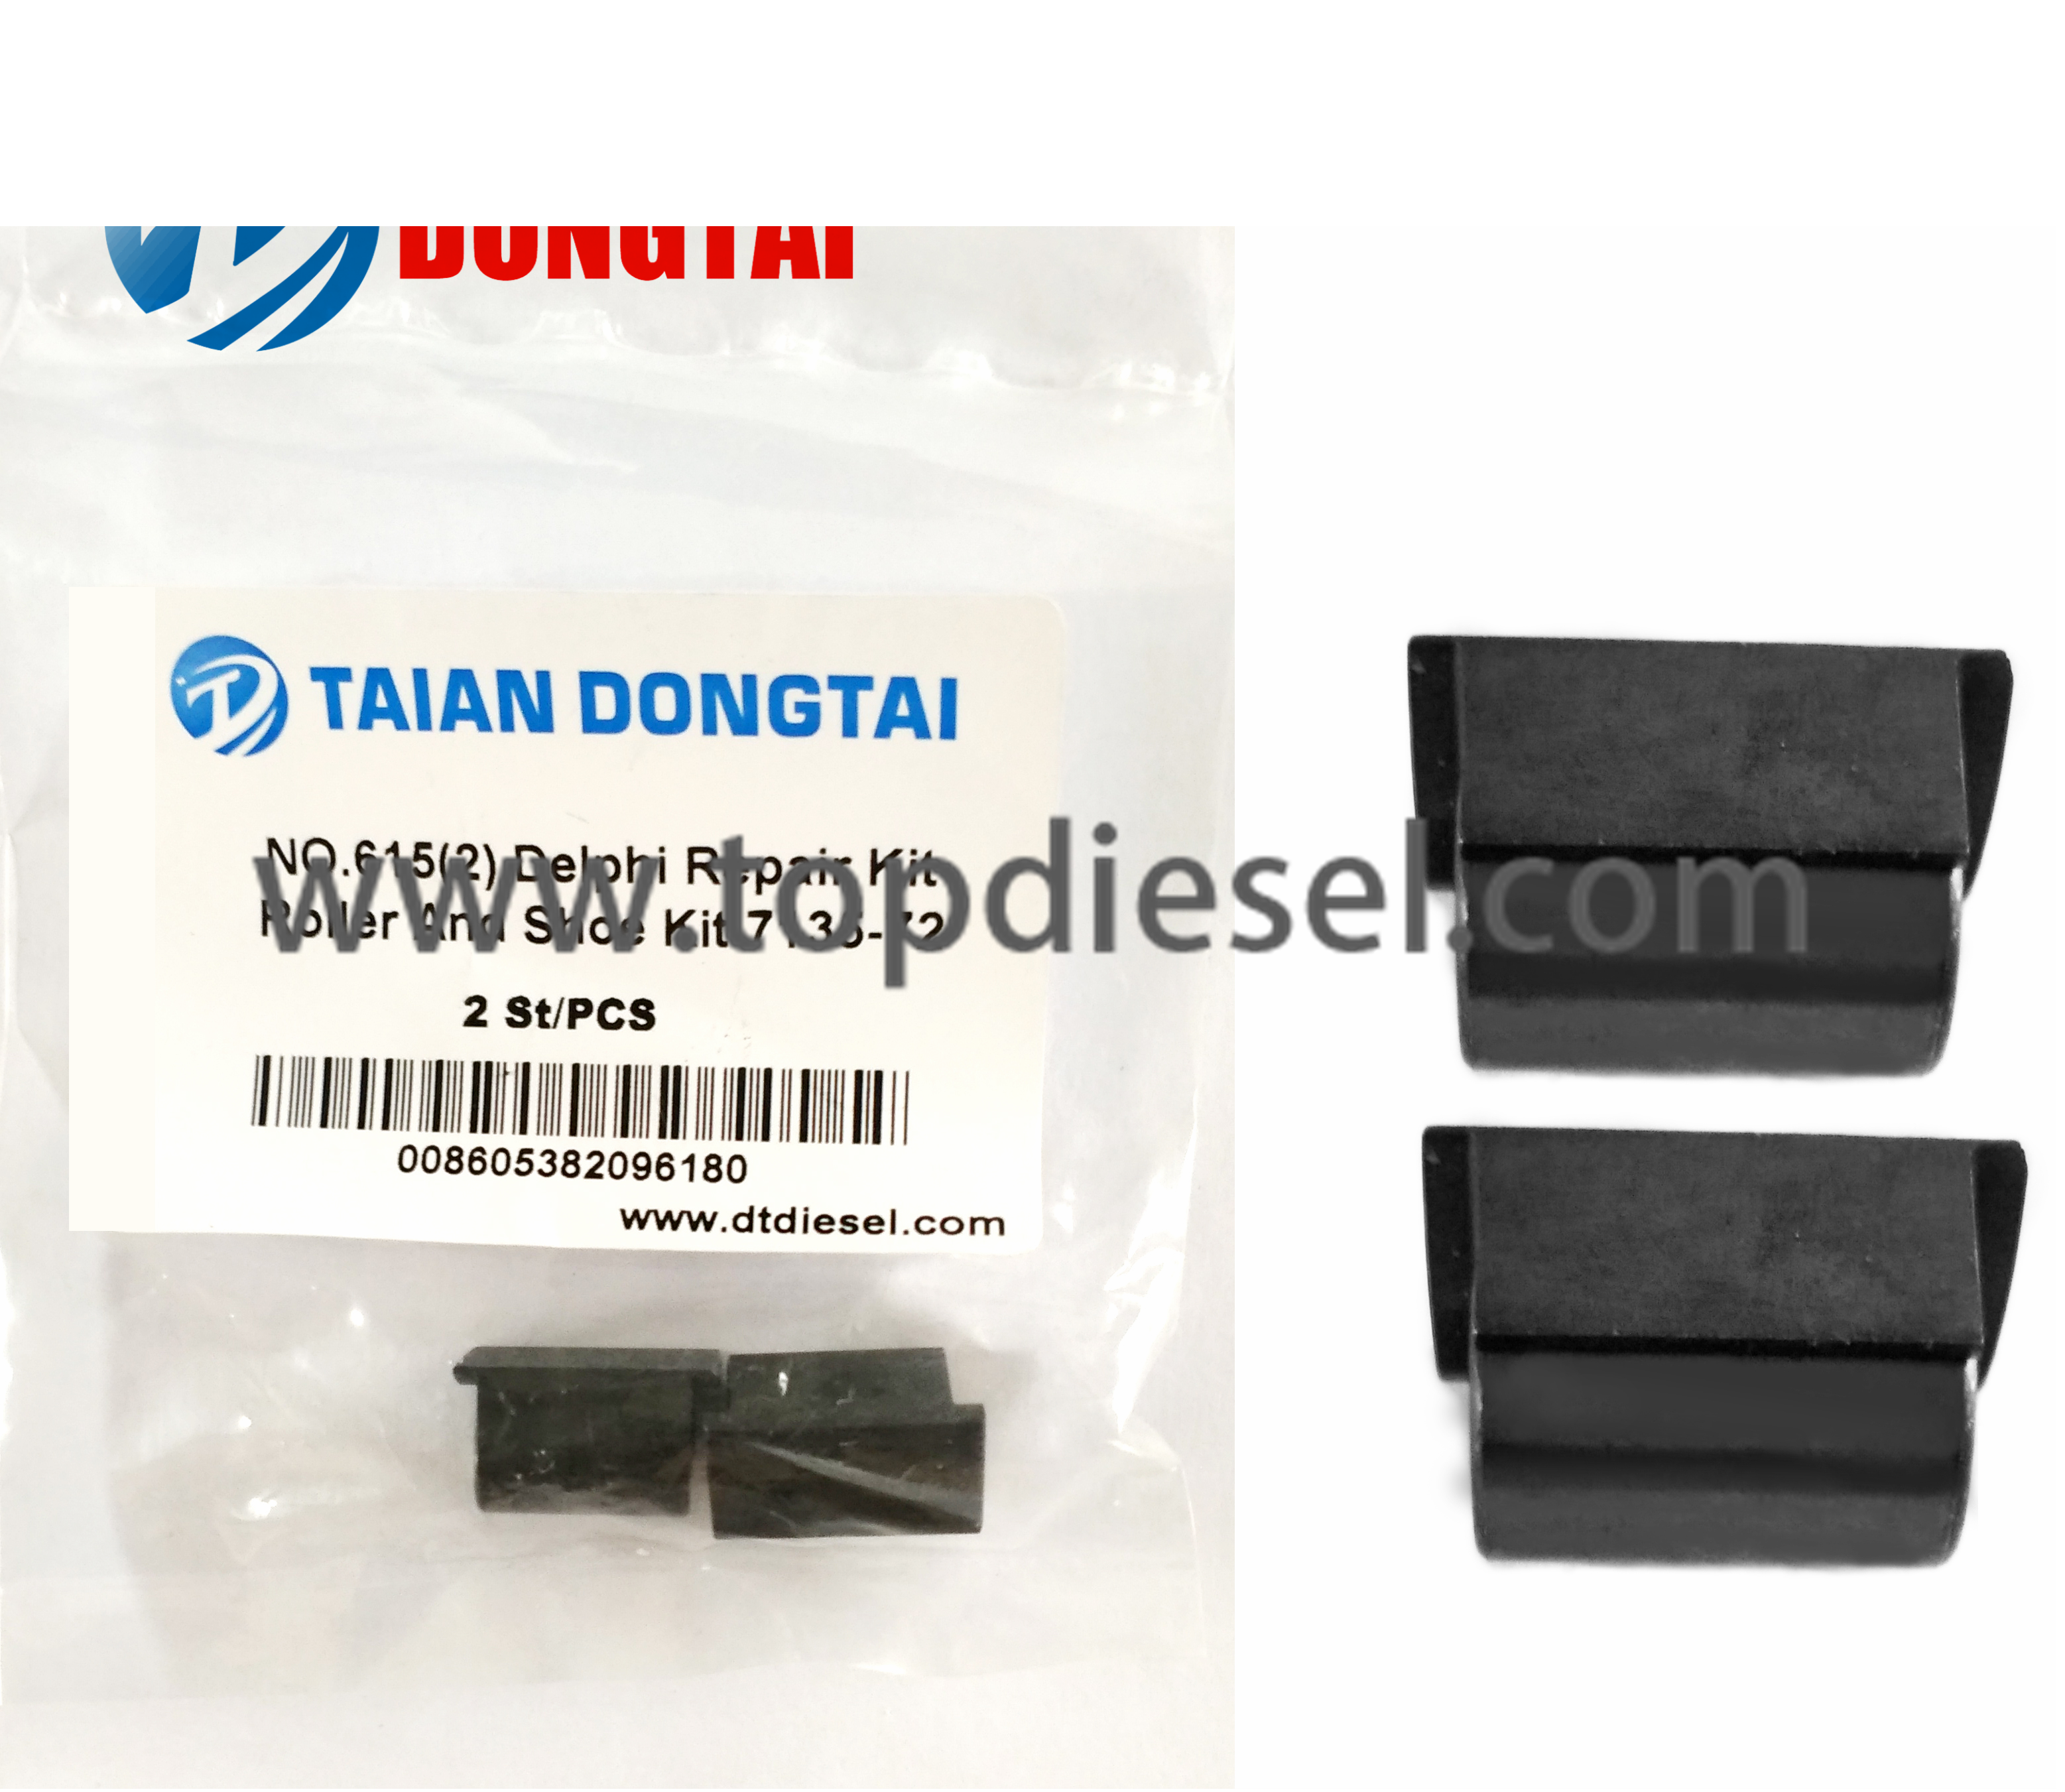 Top Suppliers Bottle Cleaning Machine - No,615(2)Delphi Repair Kit Roller And Shoe Kit 7135-72 2Pcs – Dongtai